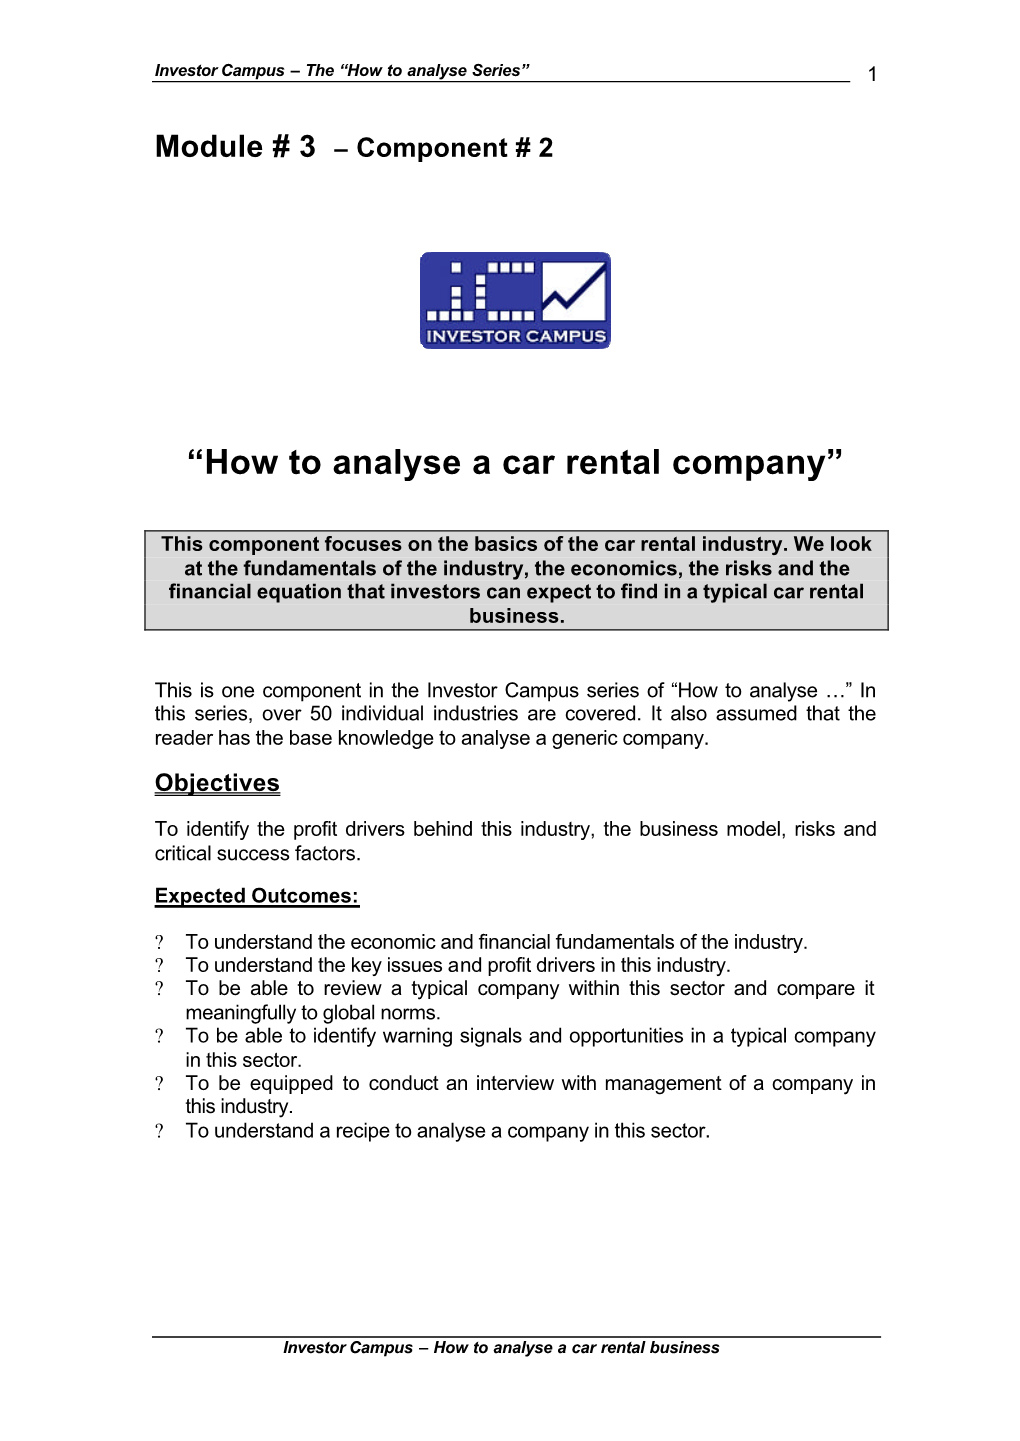 “How to Analyse a Car Rental Company”